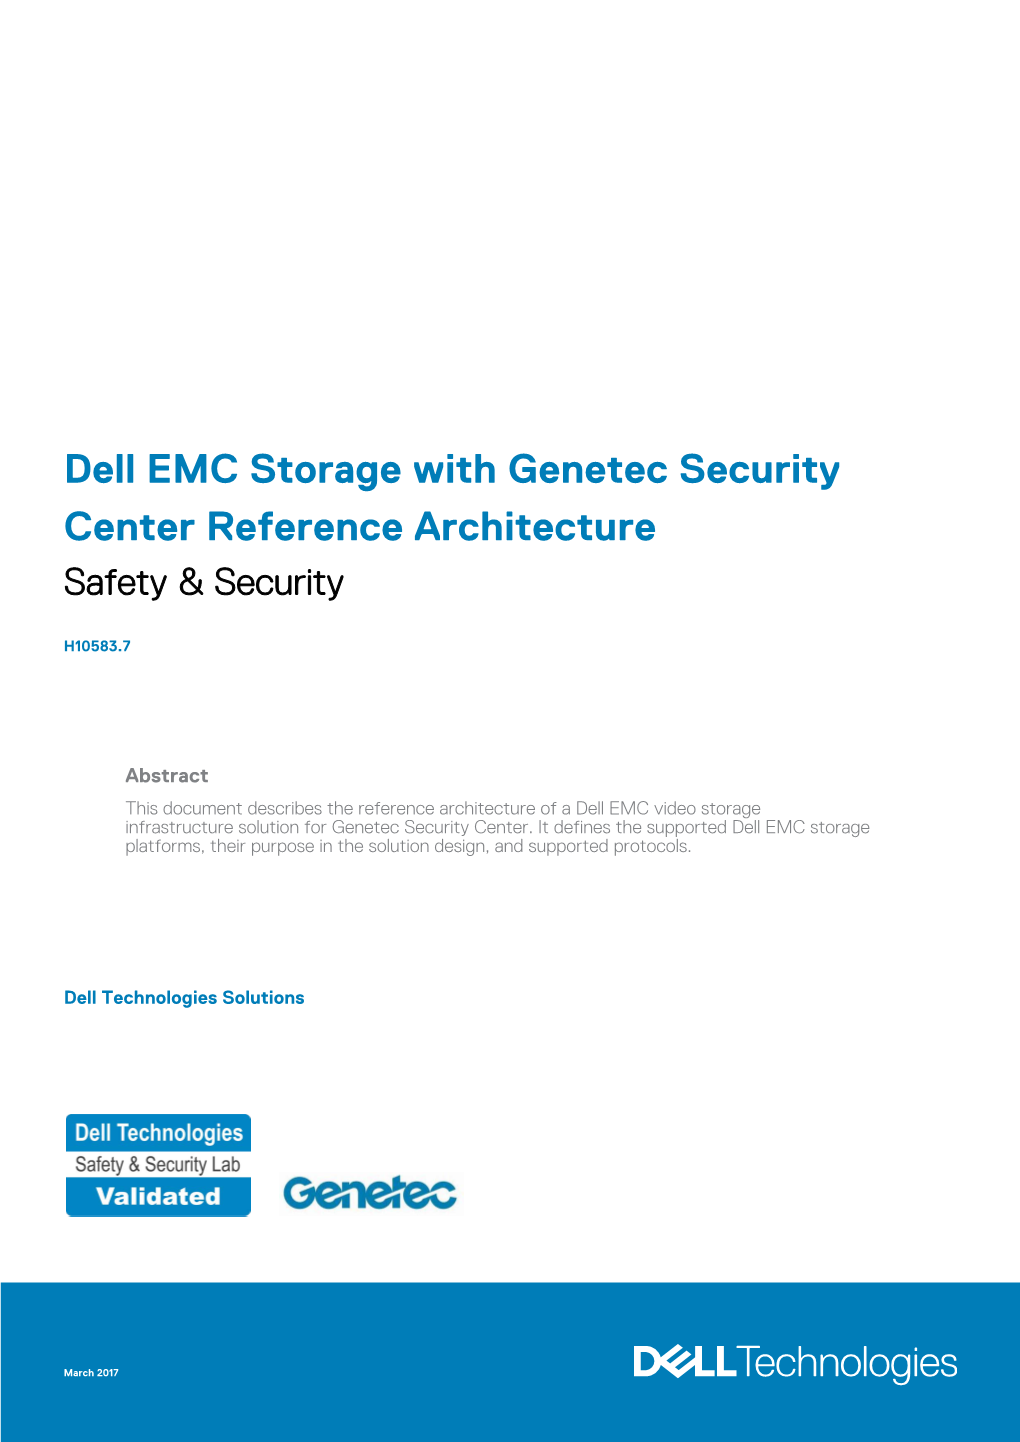 Dell EMC Storage with Genetec Security Center Reference Architecture Safety & Security